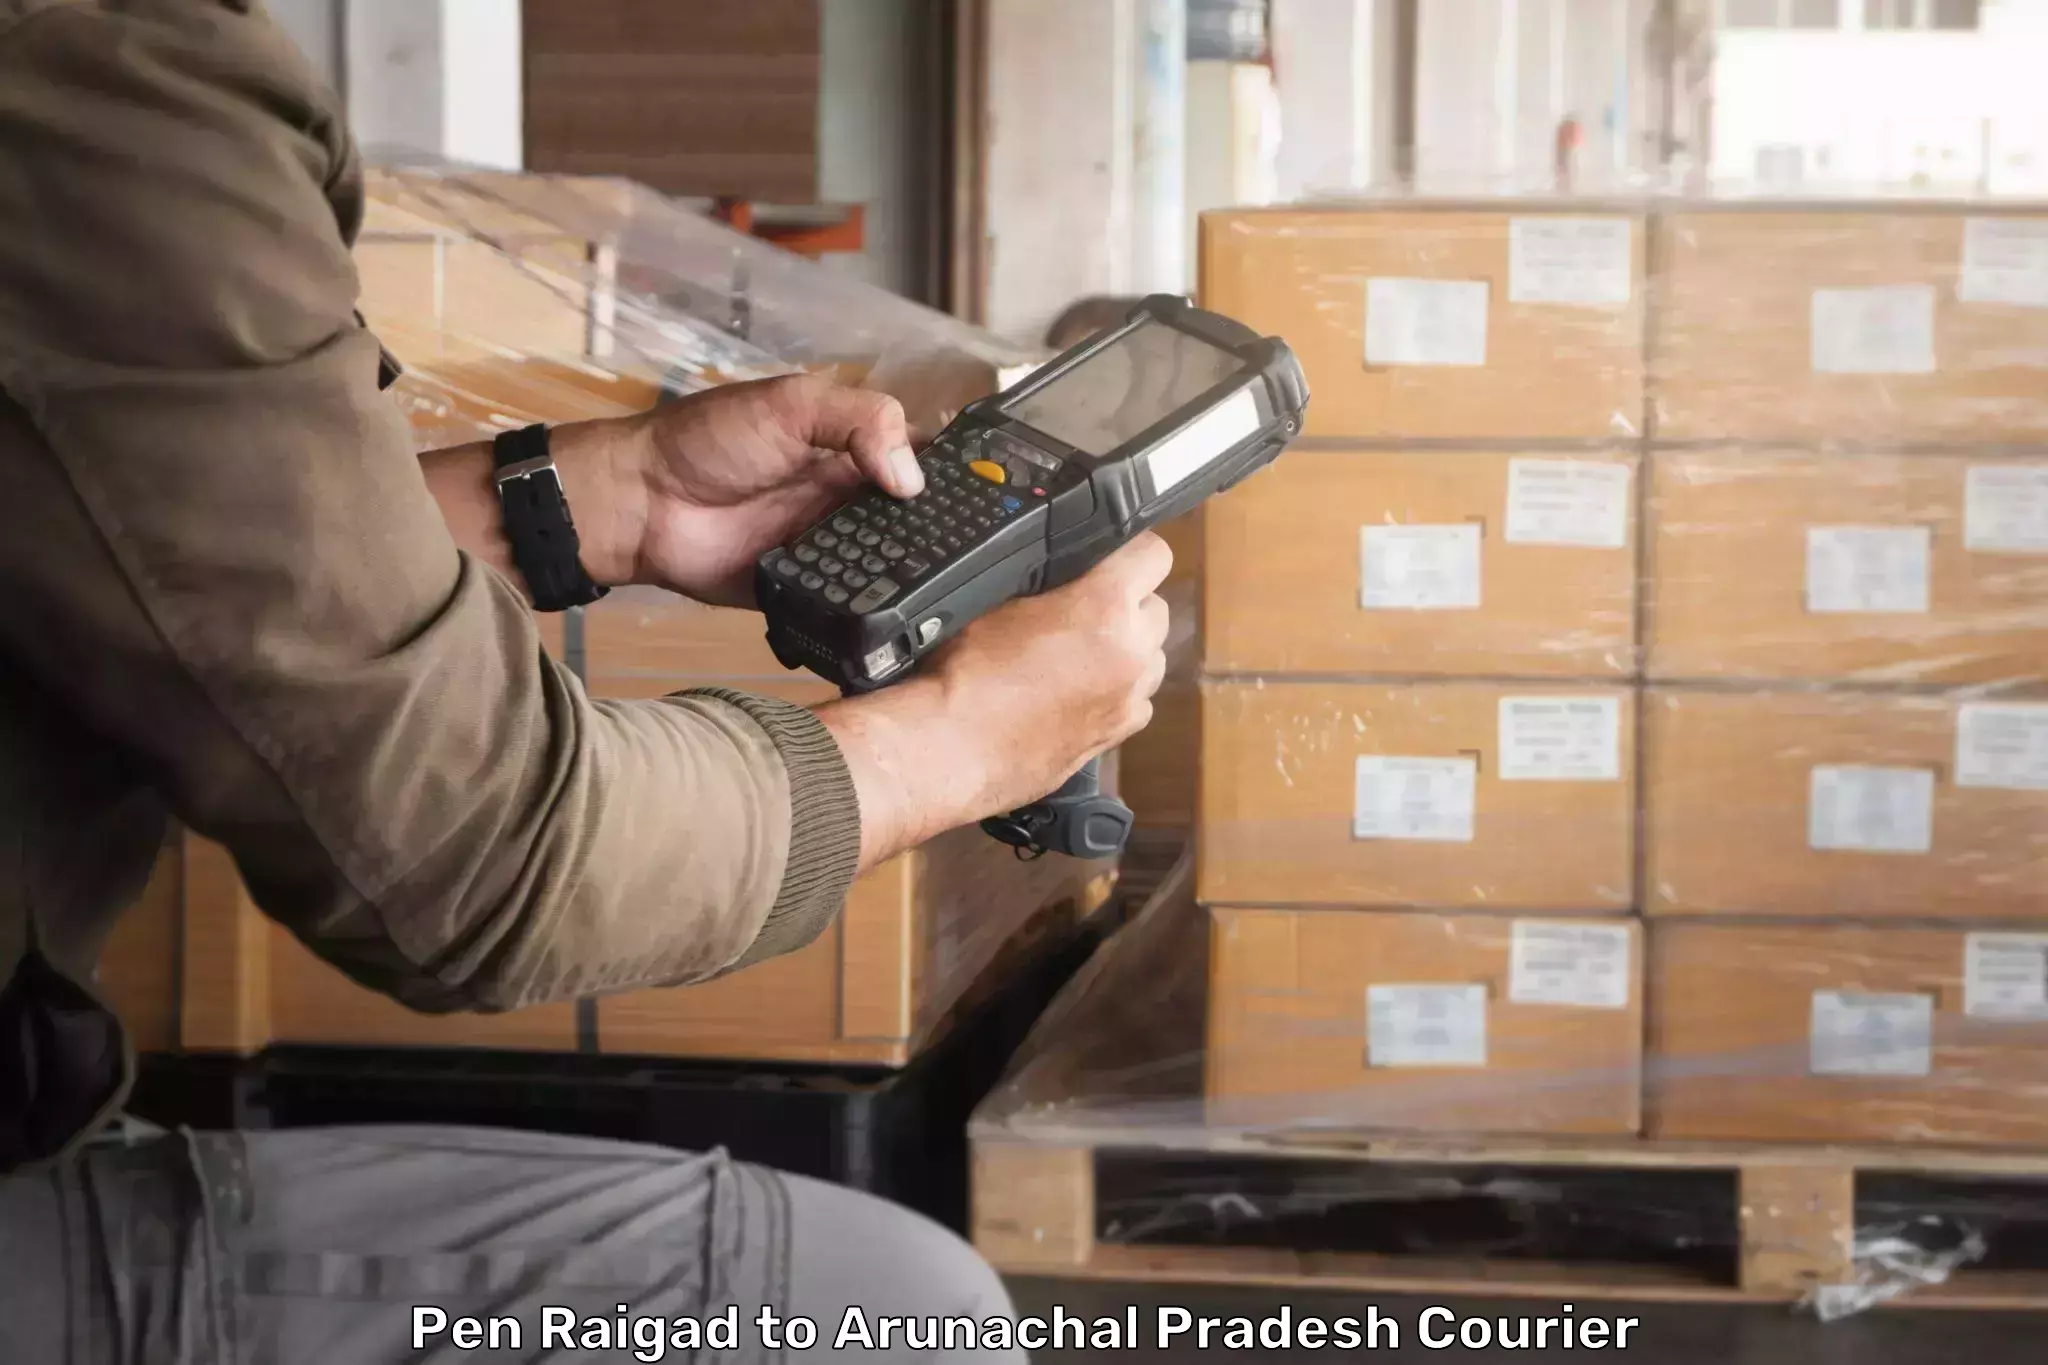 Multi-national courier services Pen Raigad to Changlang